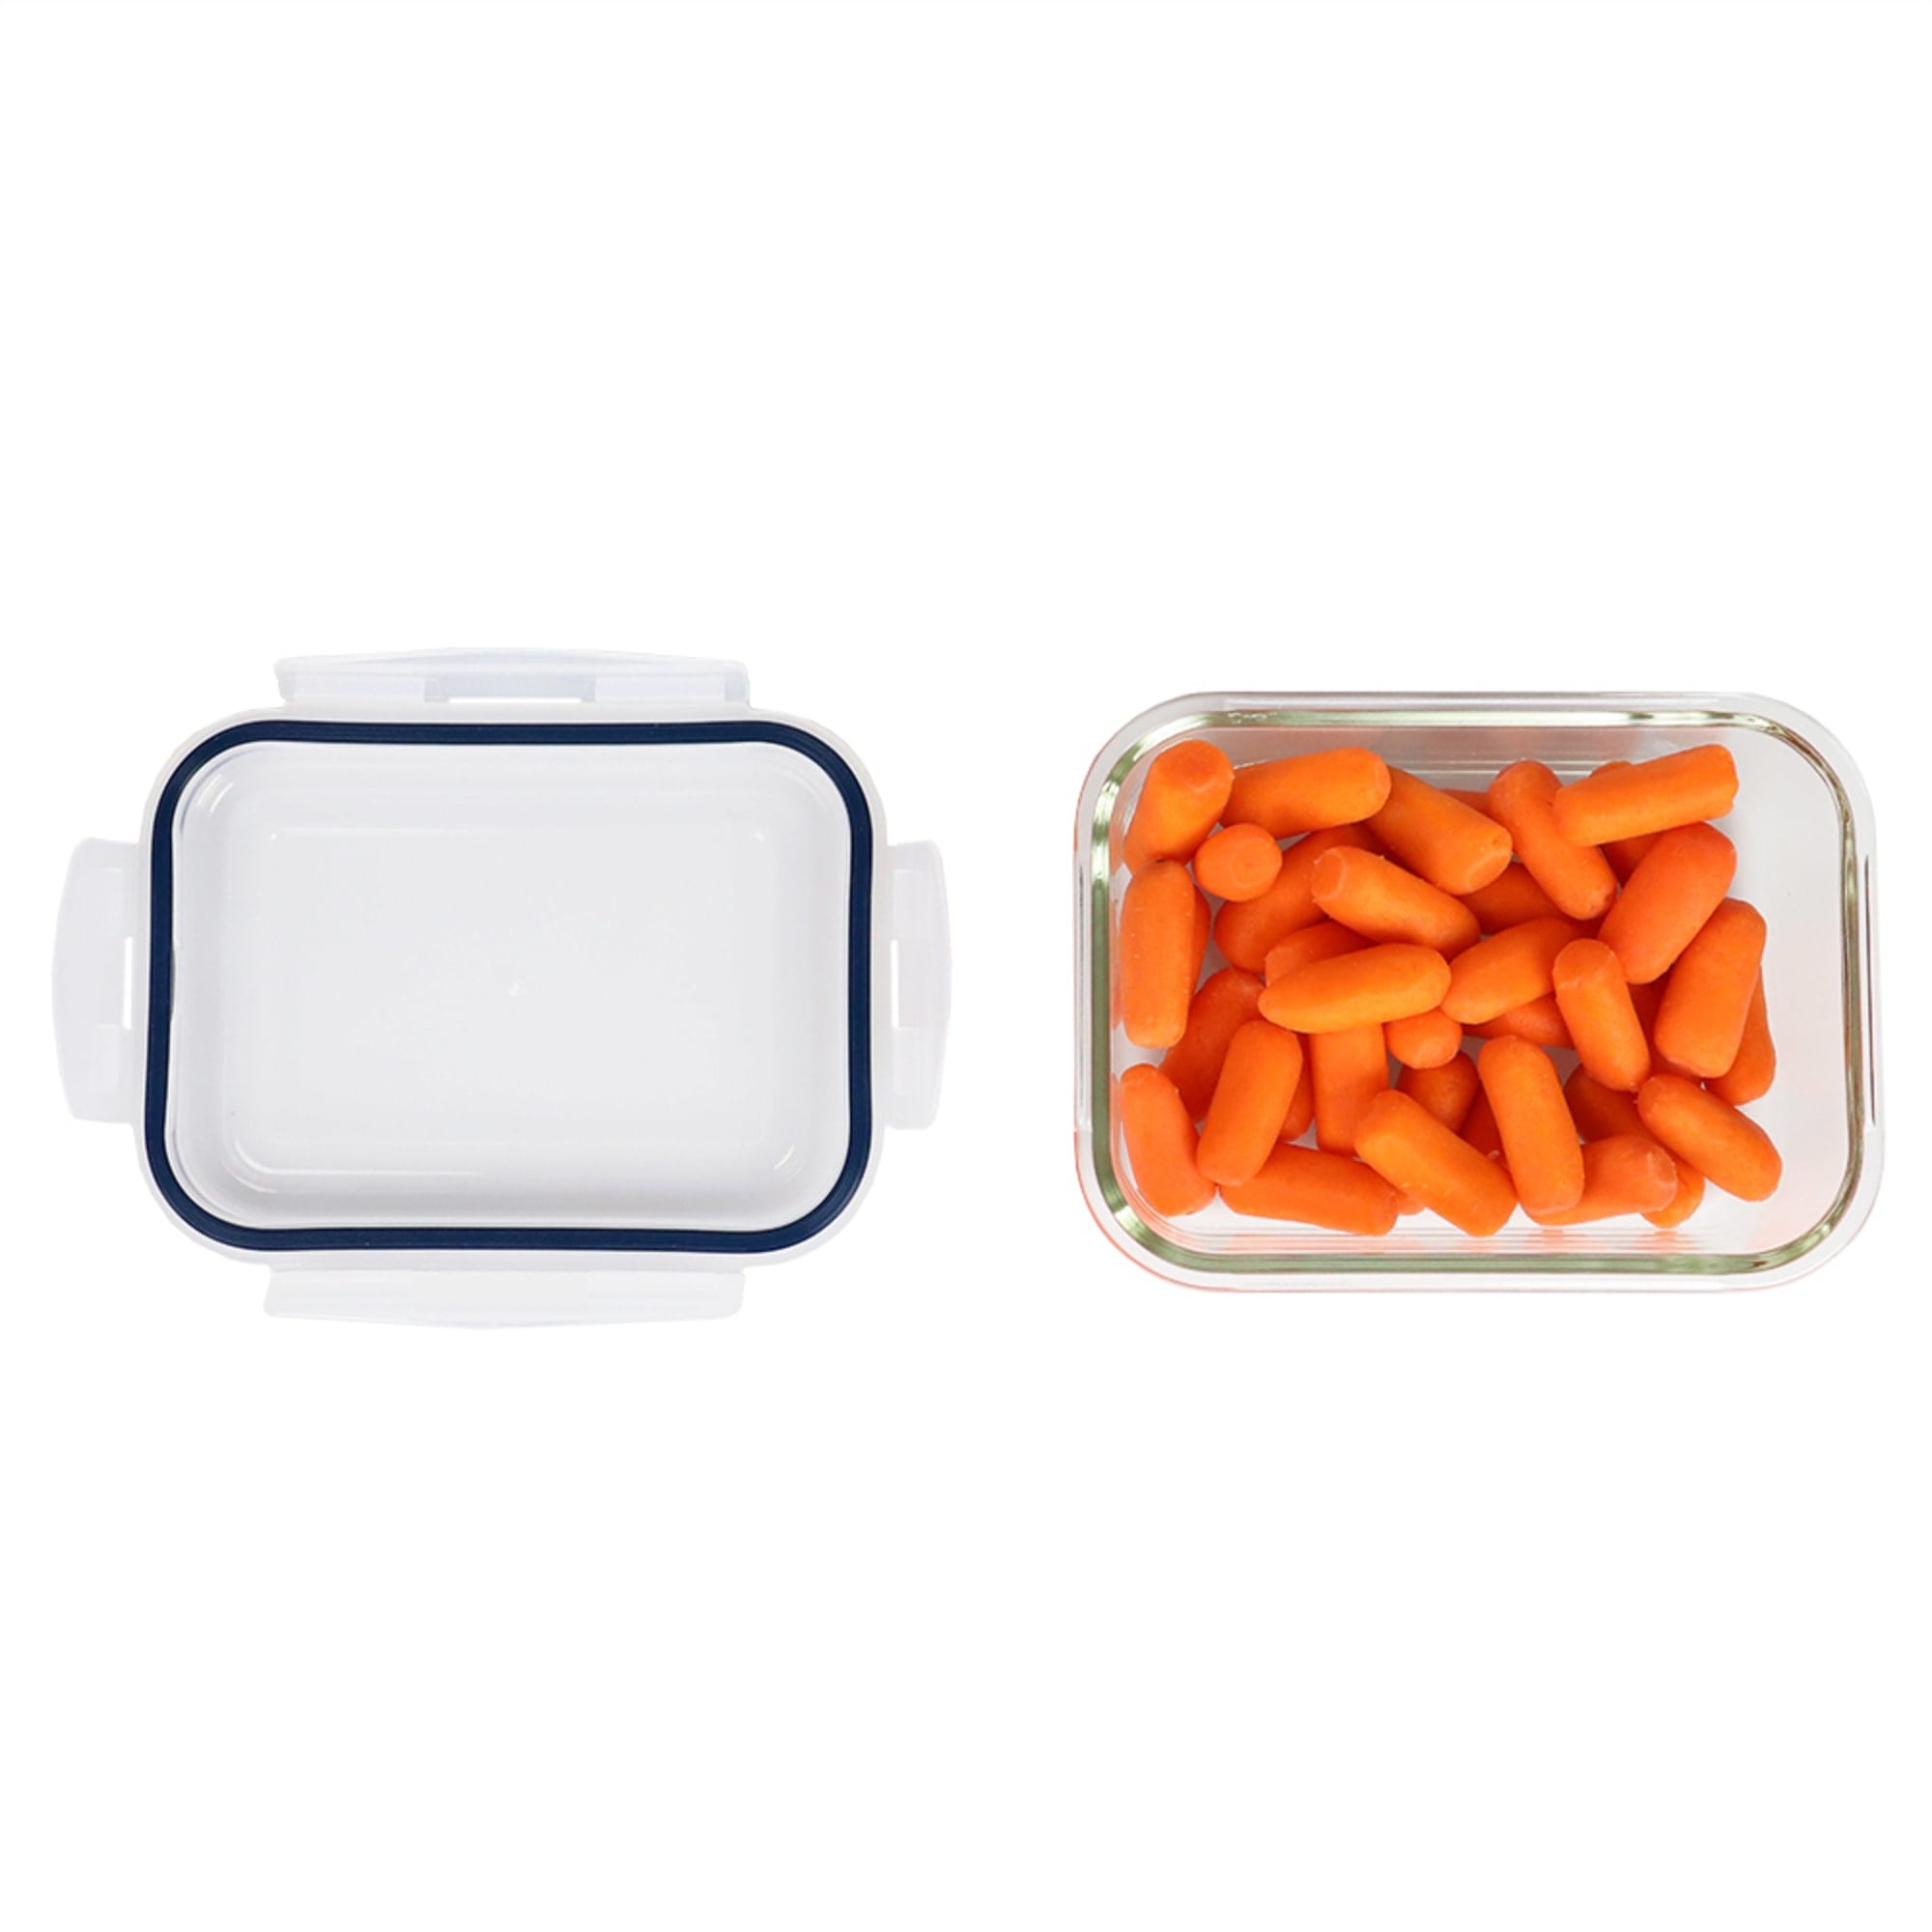 Michael Graves Design 51 Ounce High Borosilicate Glass Rectangle Food Storage Container with Indigo Rubber Seal $8.00 EACH, CASE PACK OF 12